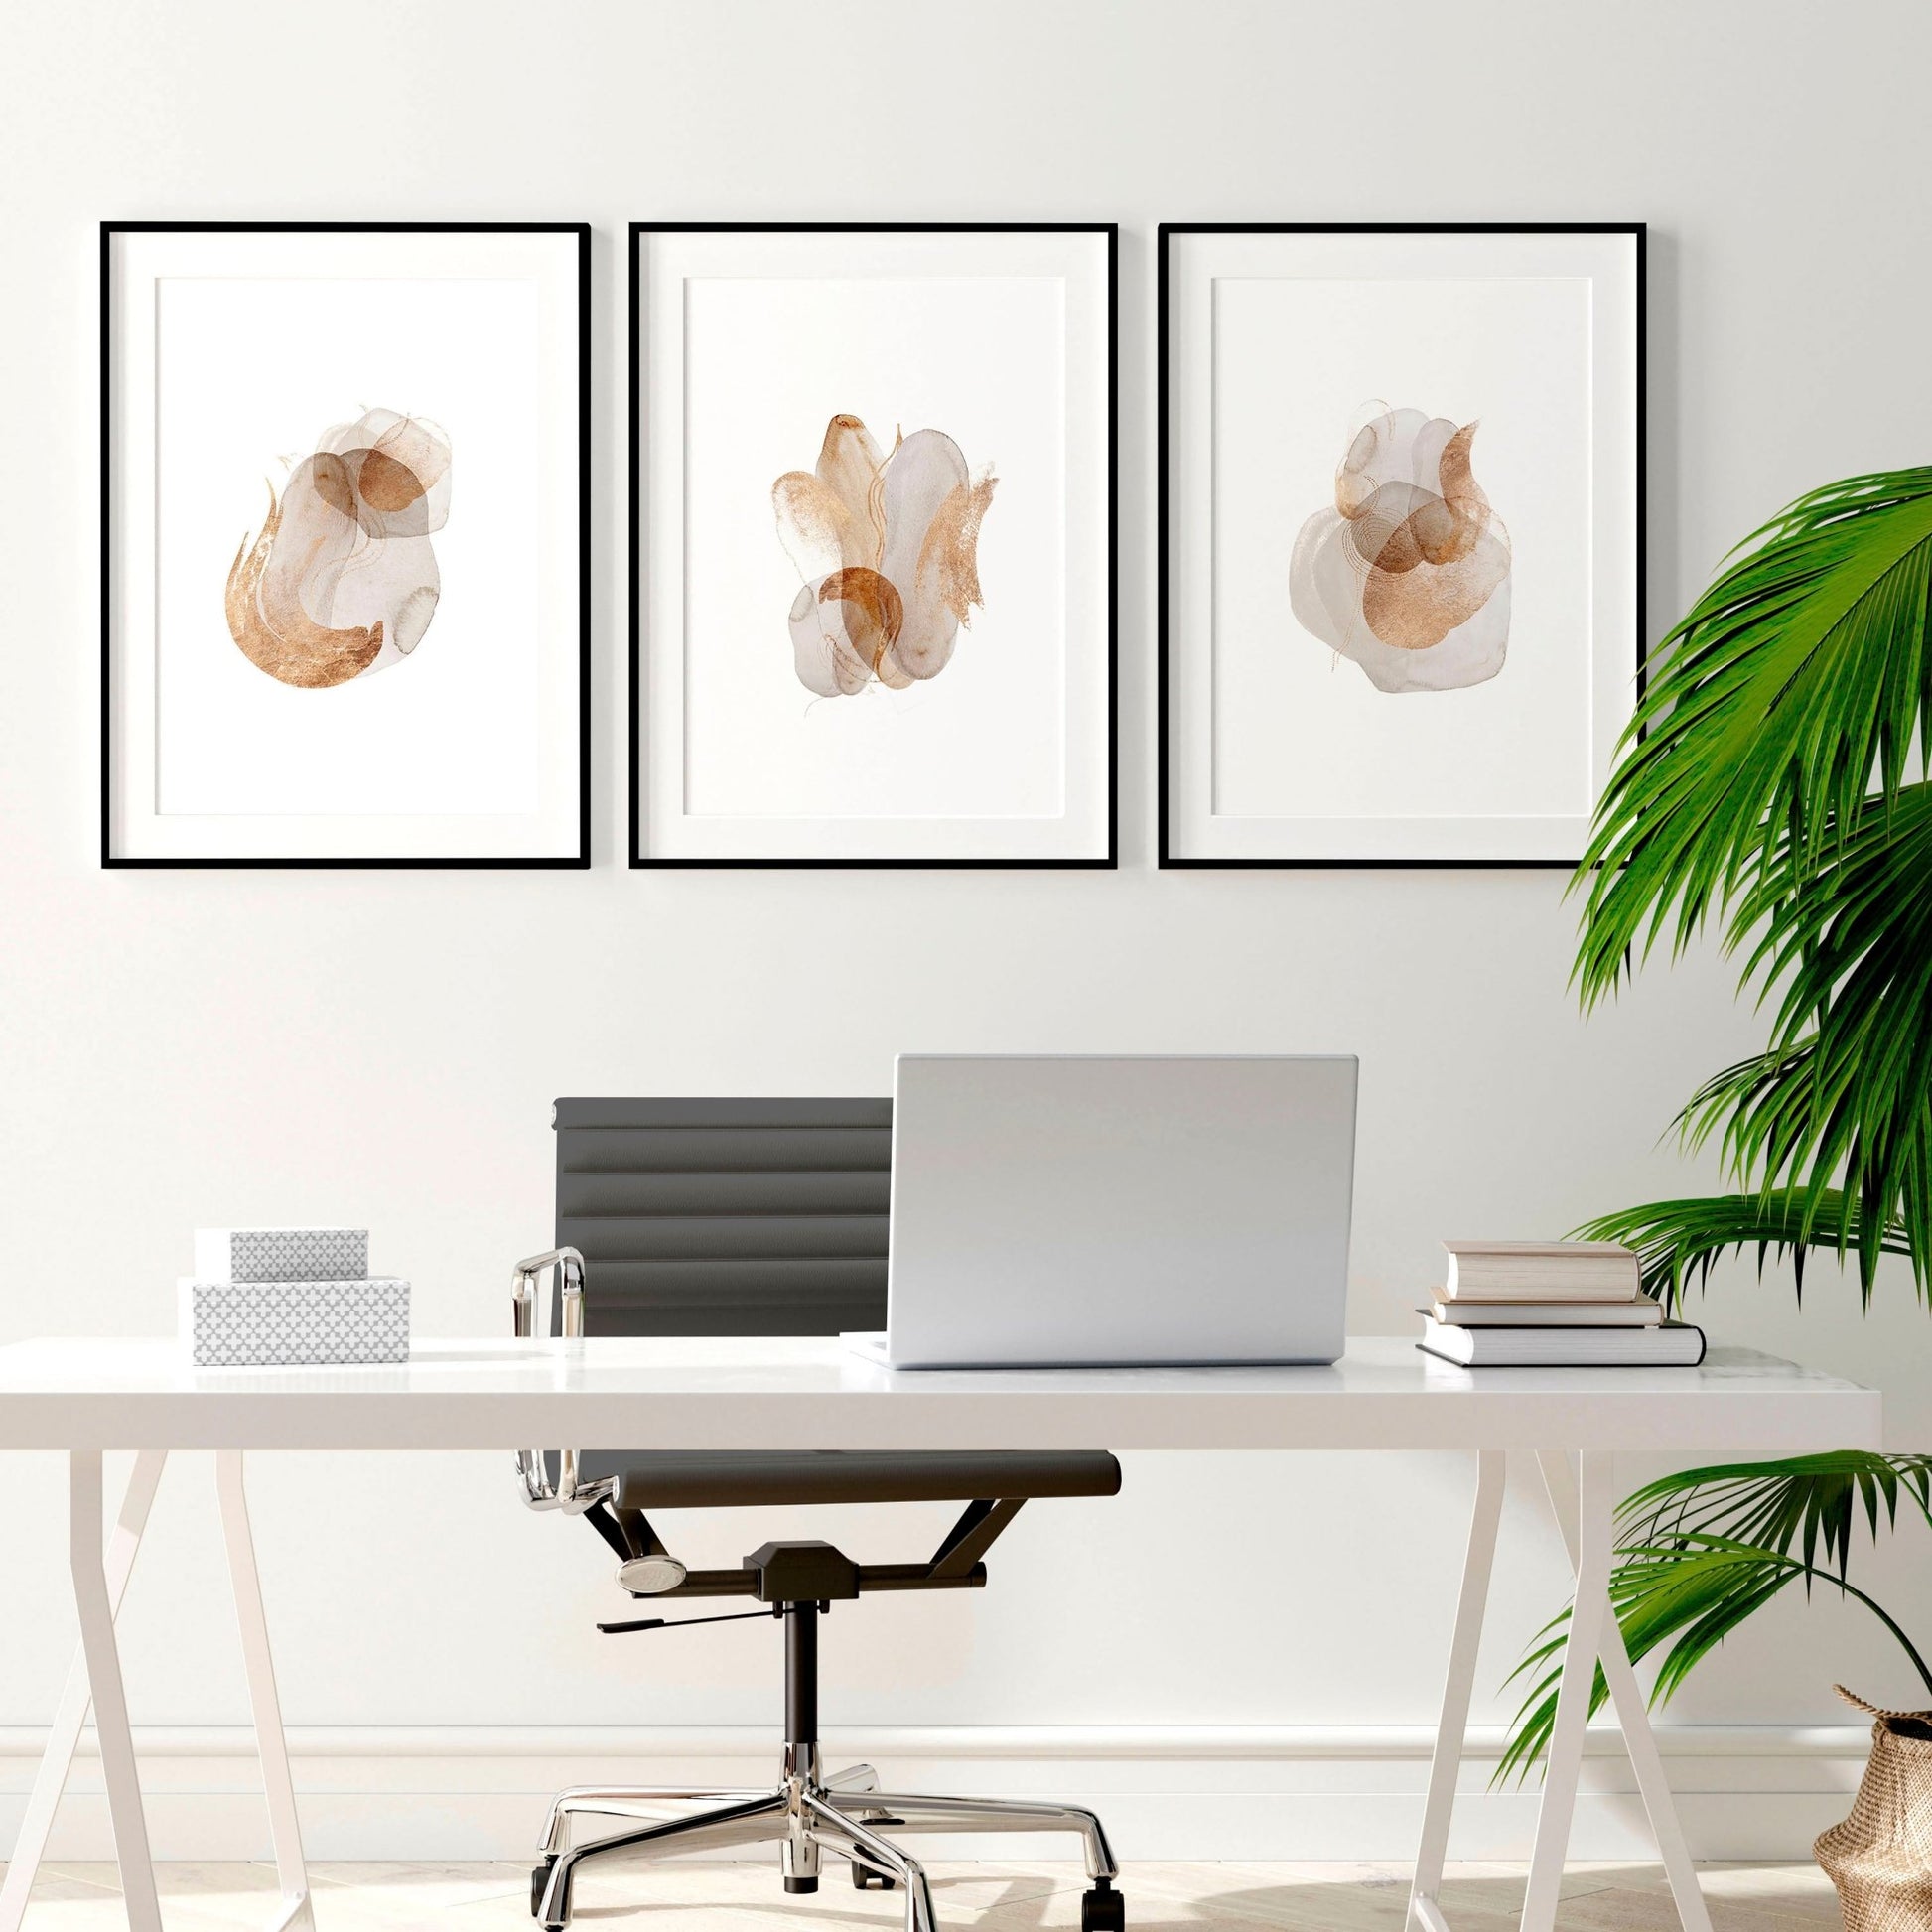 Office wall picture | set of 3 framed wall art